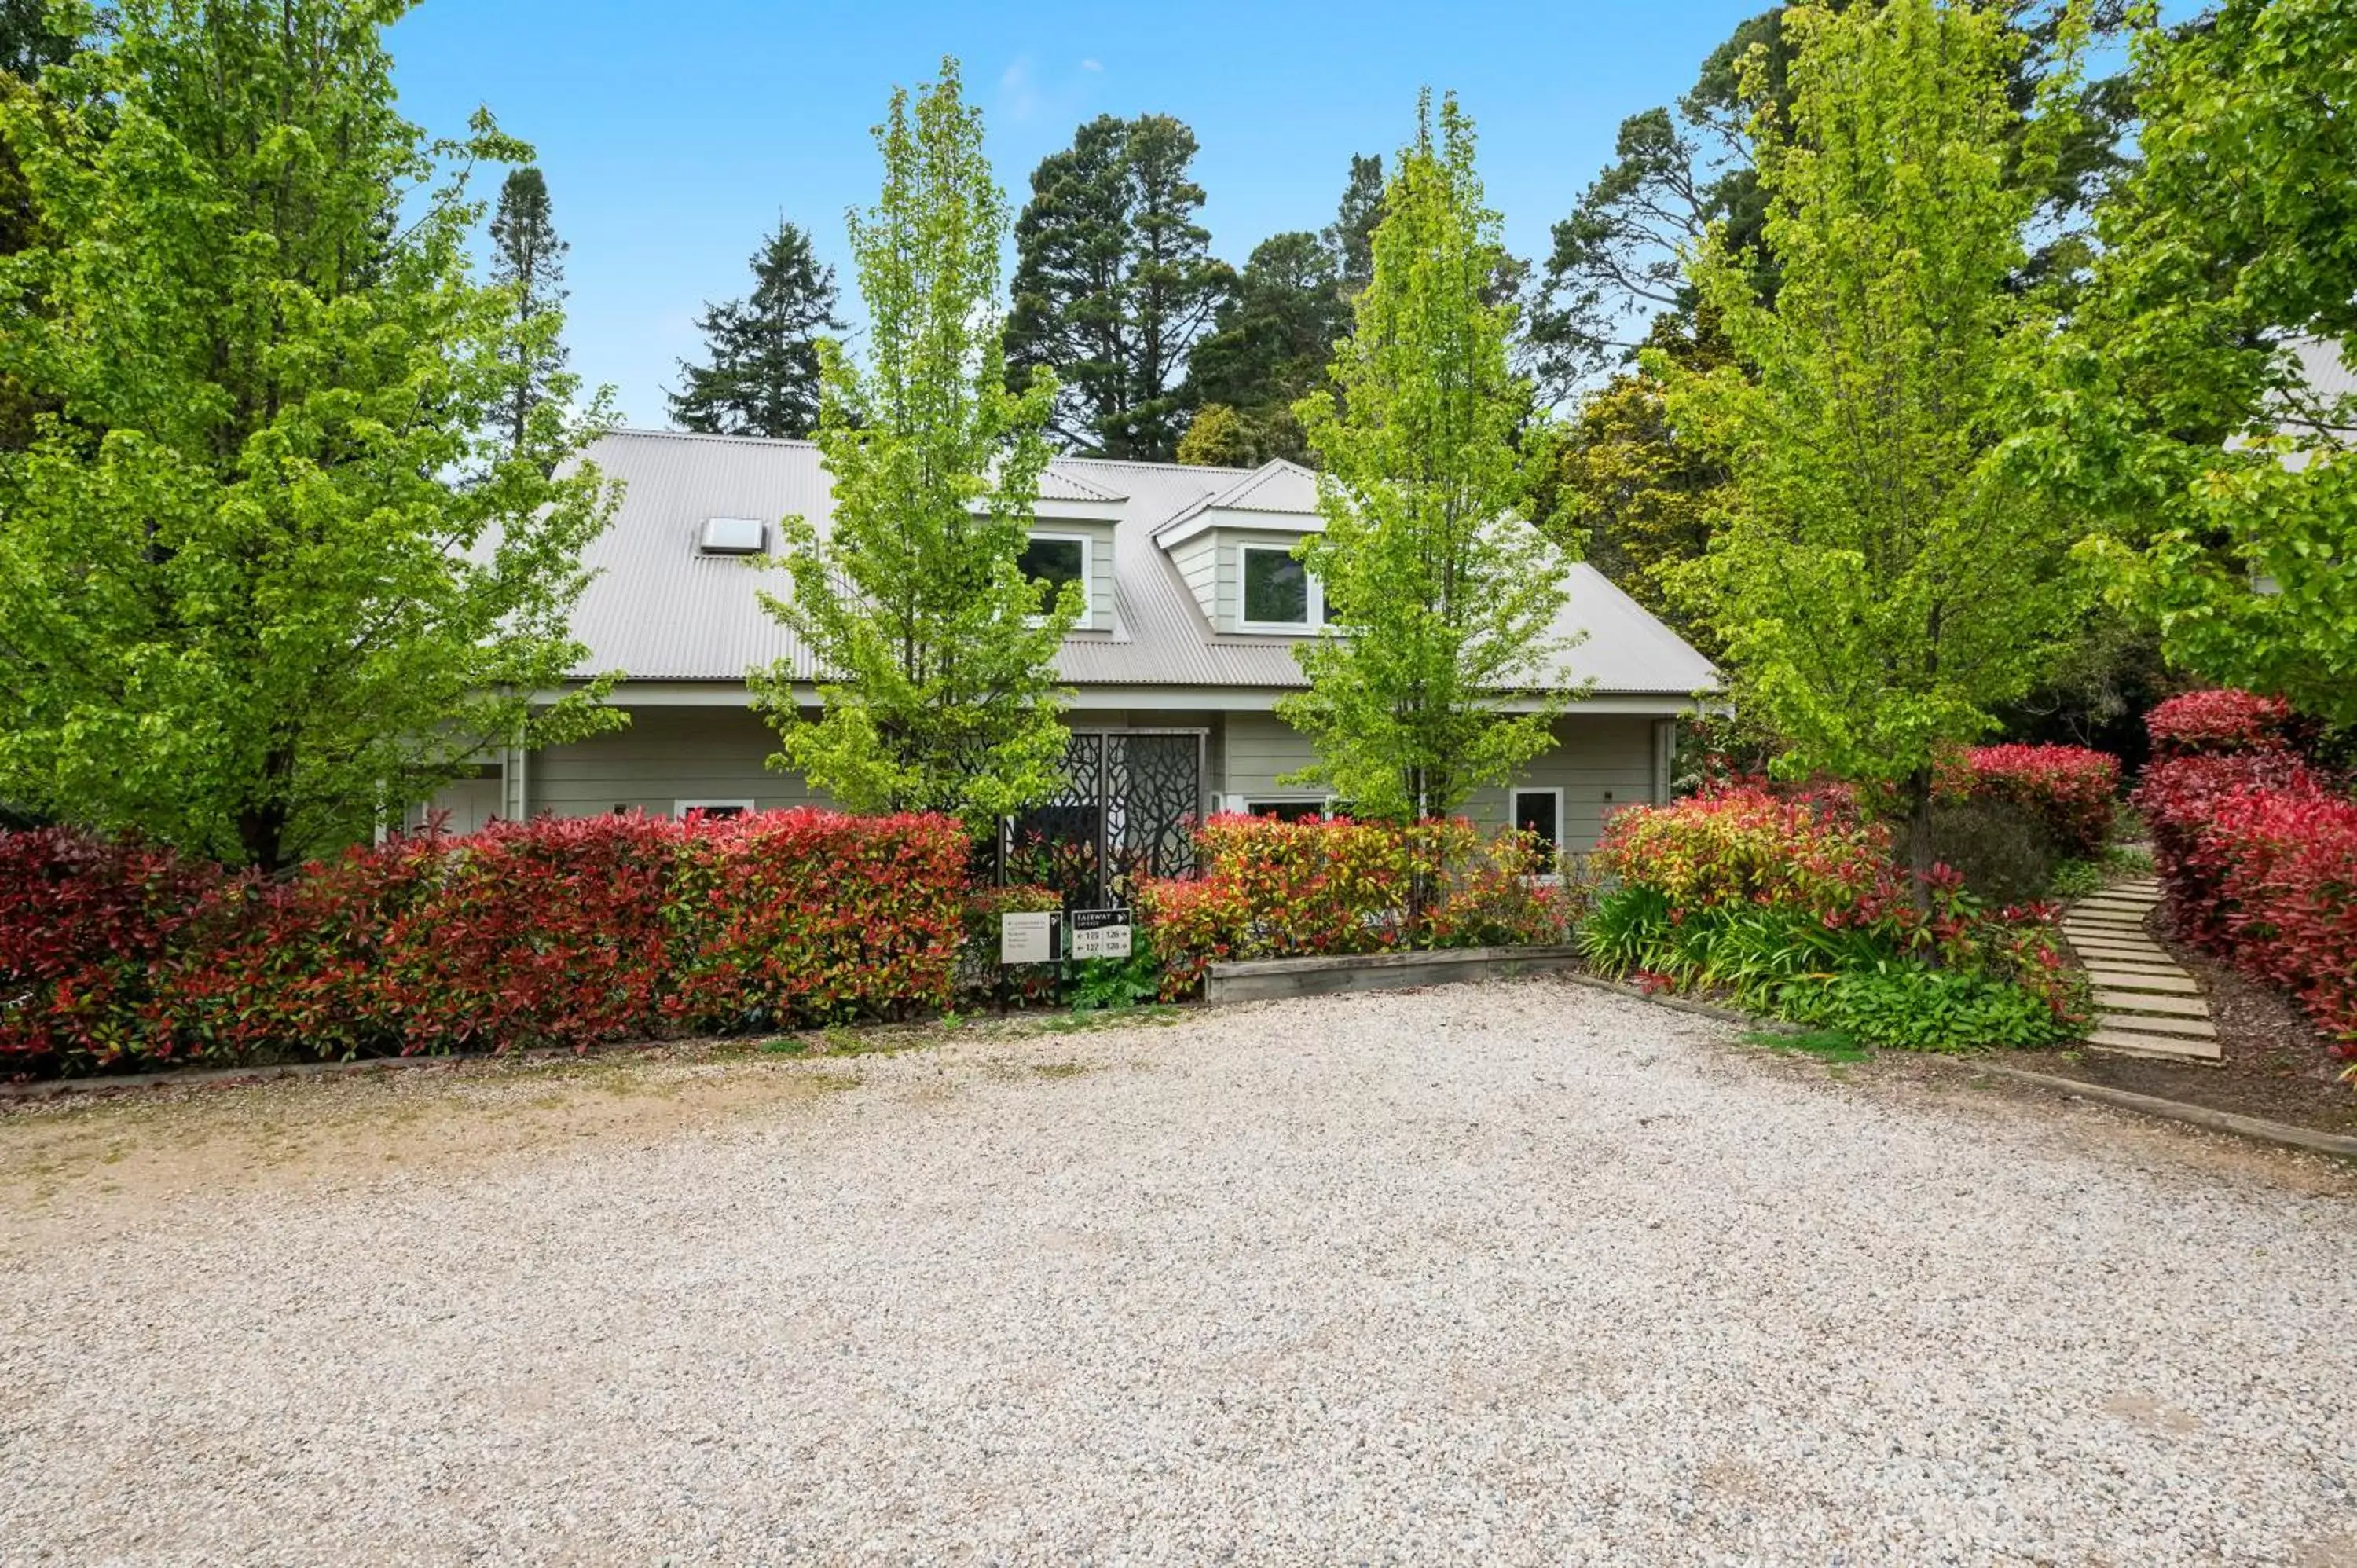 Property Building in Parklands Country Gardens & Lodges Blue Mountains